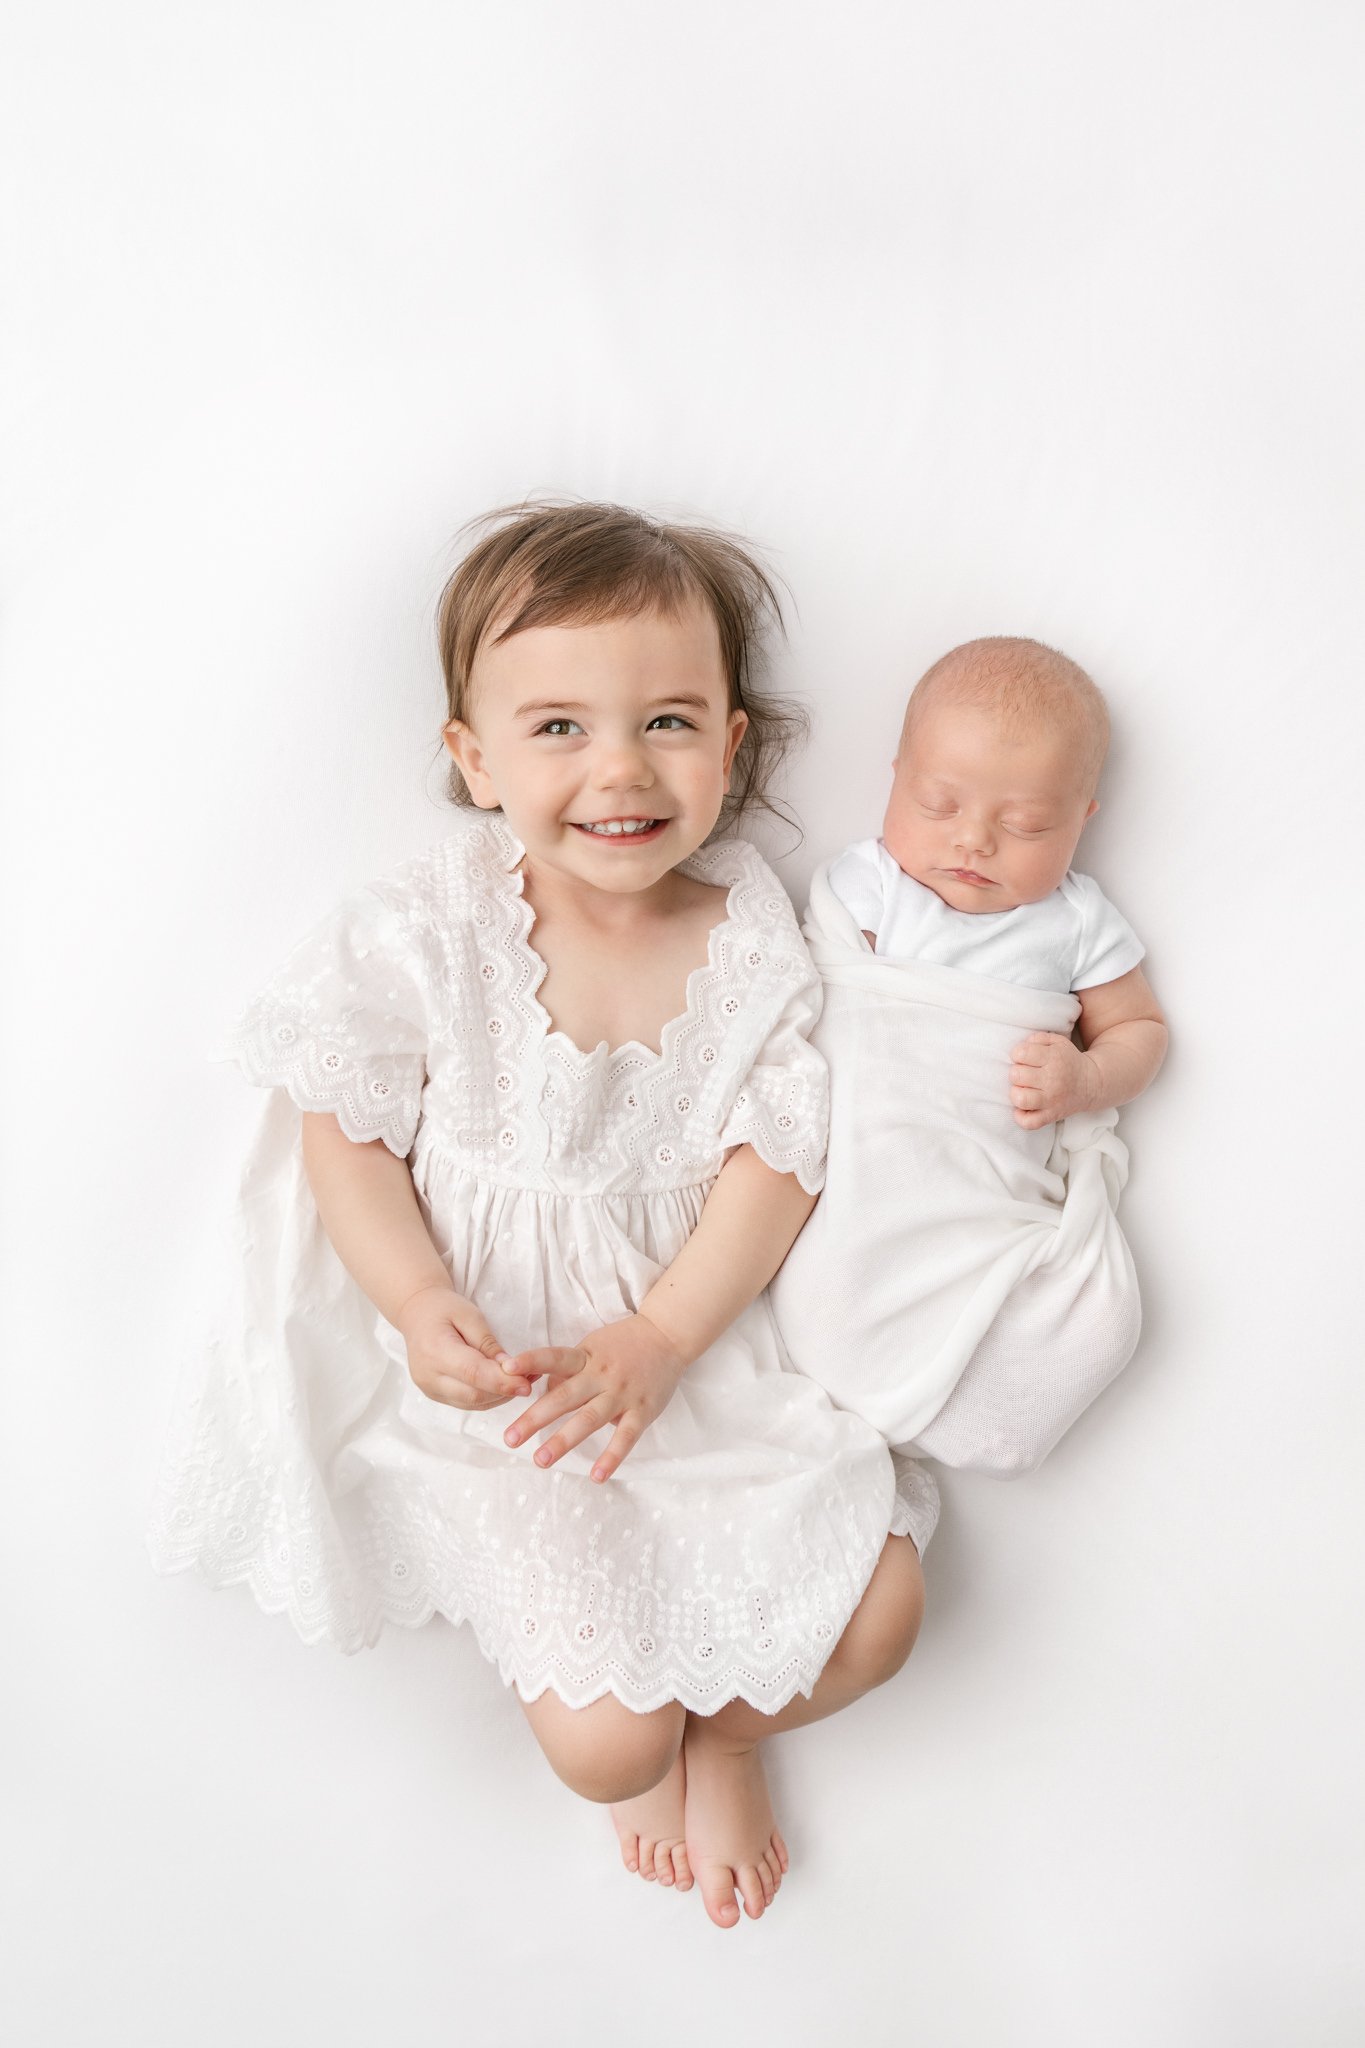  A full body above portrait of two sisters laying on a white bed by Nicole Hawkins Photography. sisters full body portrait timeless sister portrait #NicoleHawkinsPhotography #NicoleHawkinsNewborns #StudioNewborn #StudioFamily #EastCoastNewbornPhotogr